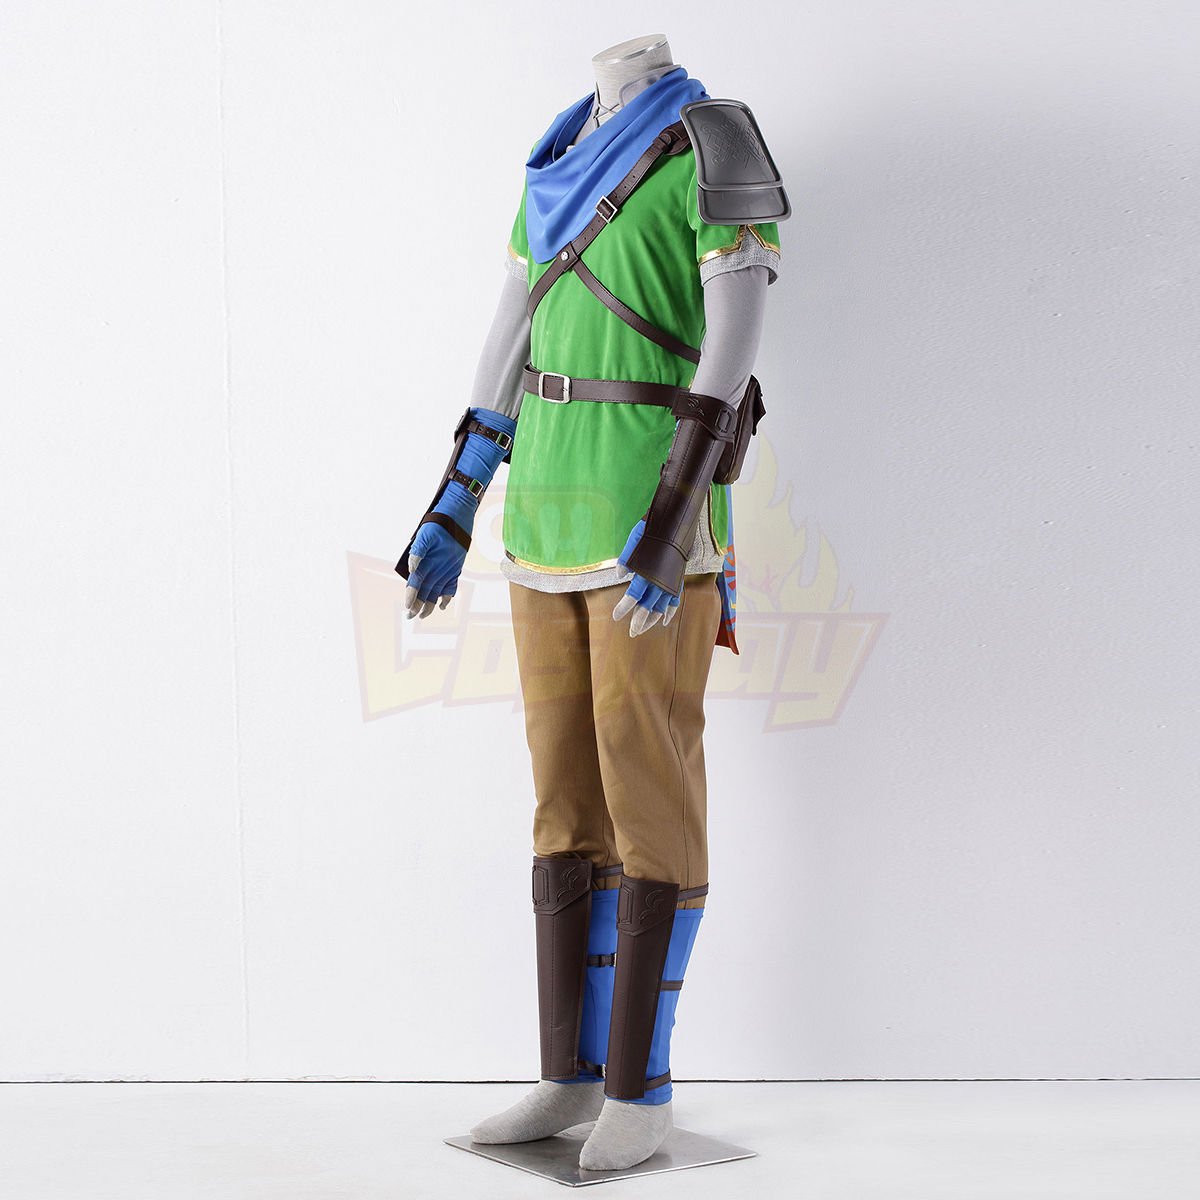 The Legend of Zelda Hyrule-Warriors Link 5TH Cosplay Costumes Deluxe Edition [A153]